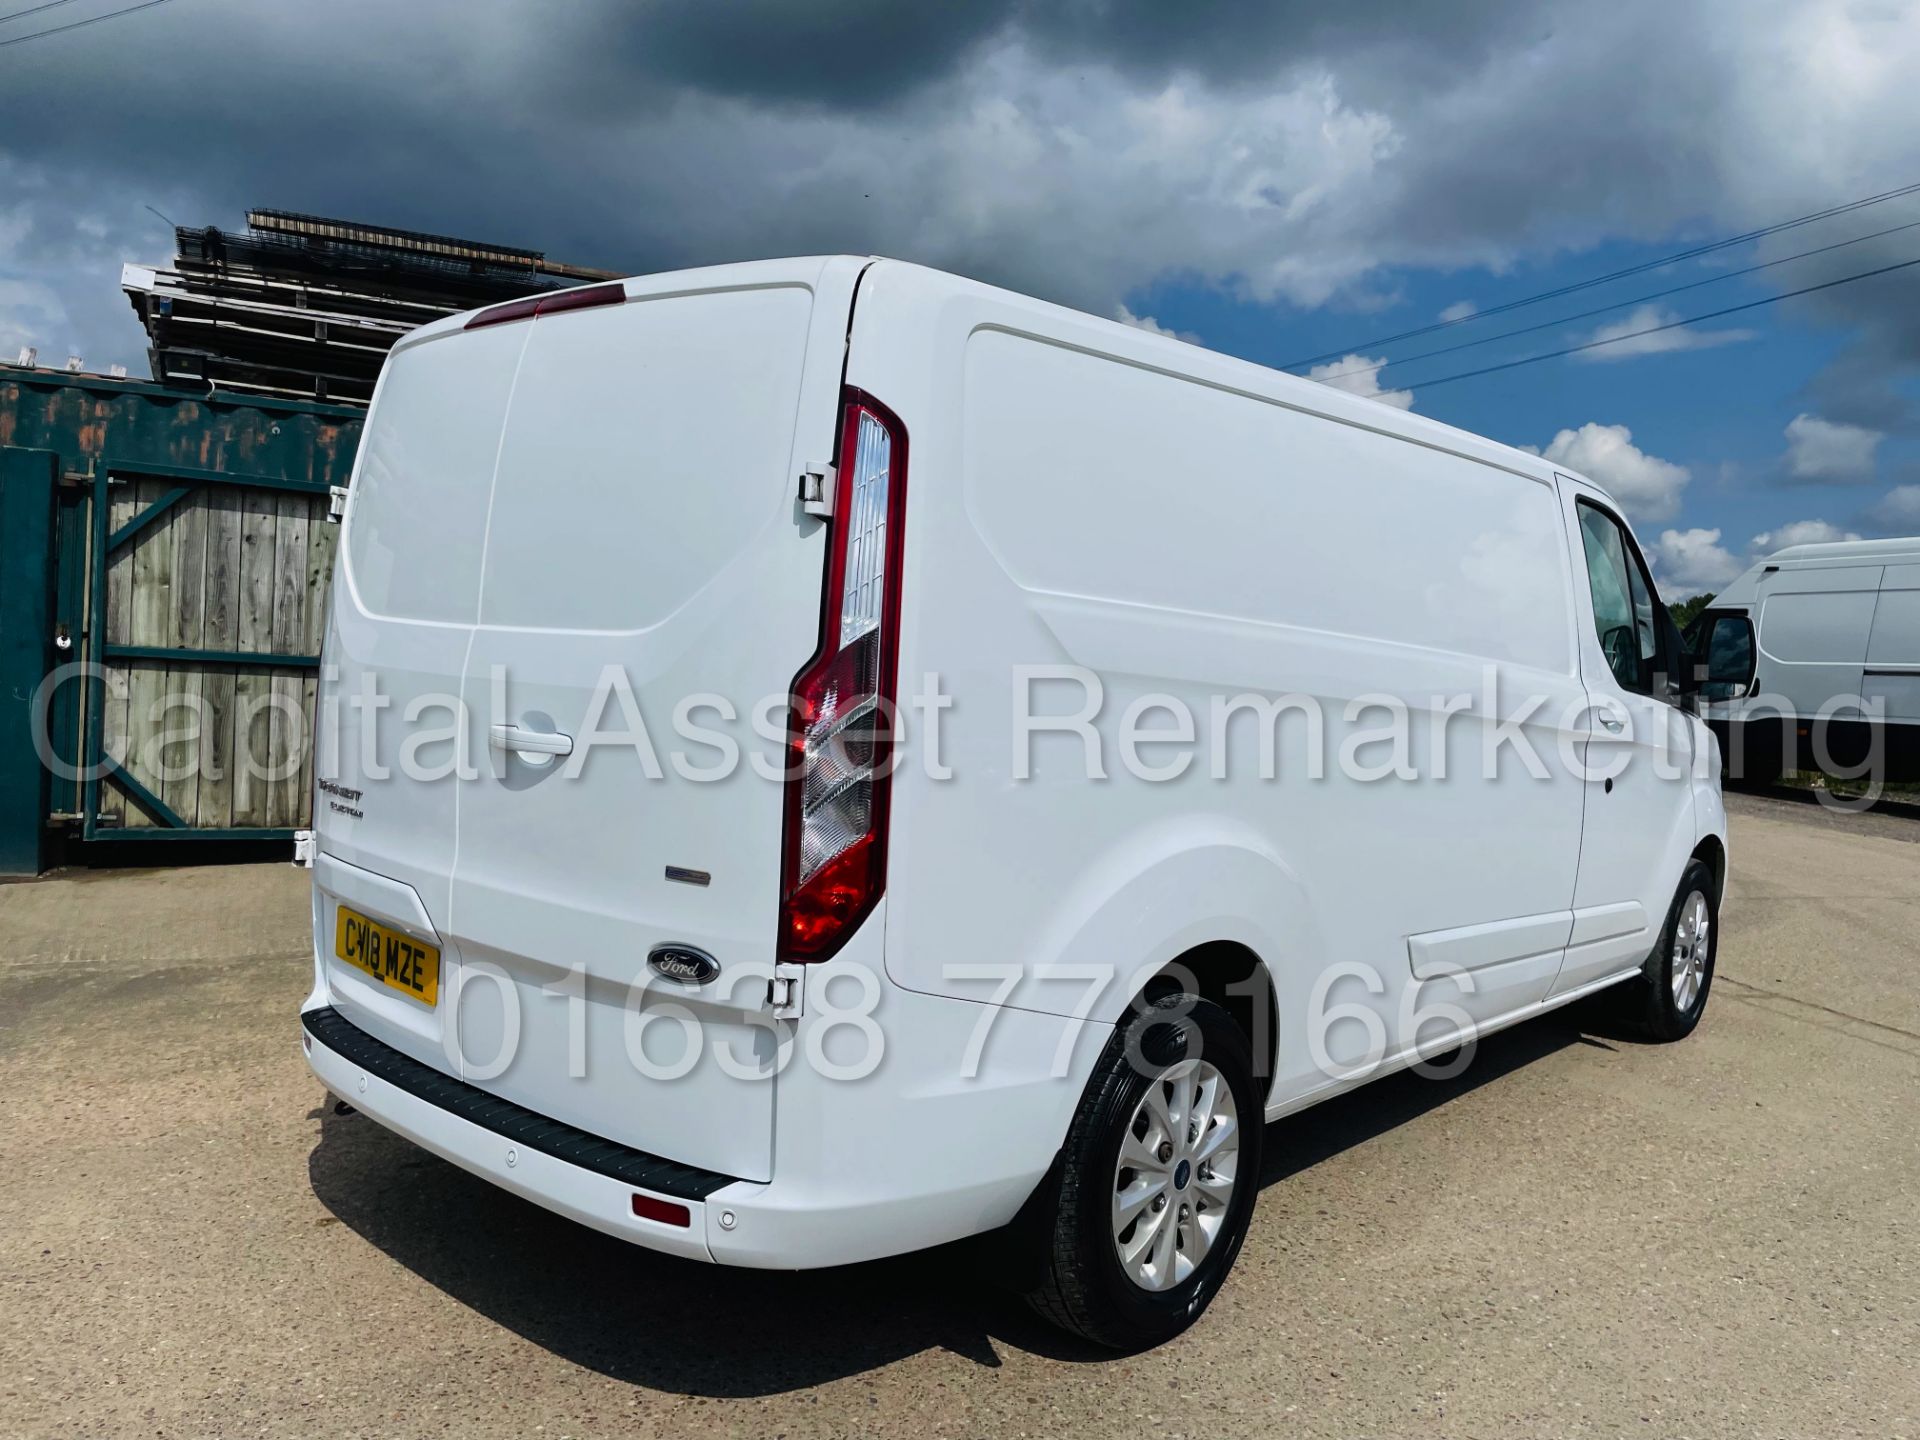 FORD TRANSIT CUSTOM *LIMITED EDITION* PANEL VAN (2018 - NEW MODEL) '2.0 TDCI - EURO 6 - 6 SPEED' - Image 8 of 46